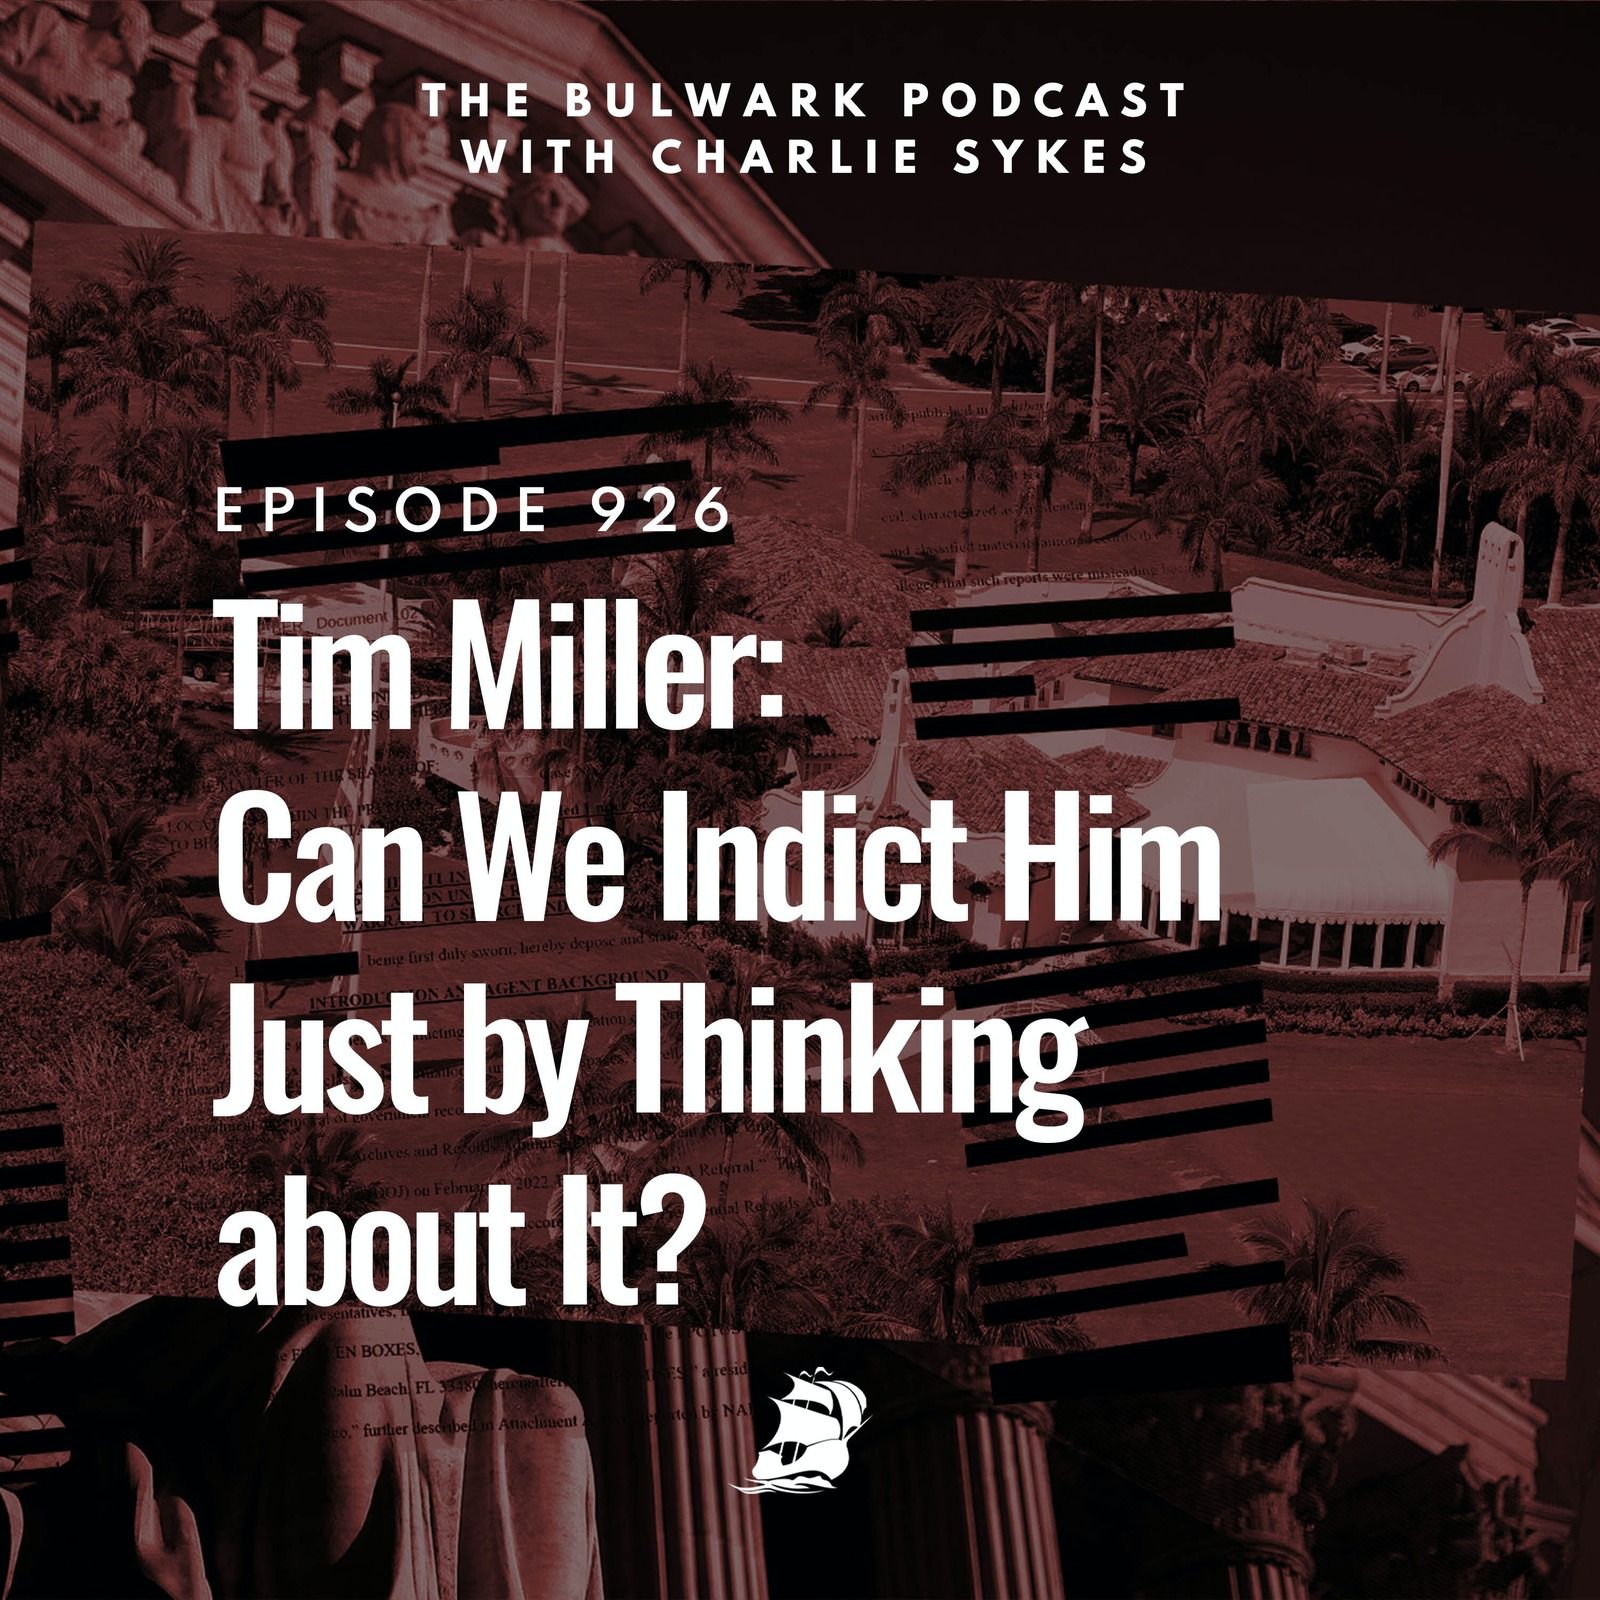 Tim Miller: Can We Indict Him Just by Thinking about It? by The Bulwark Podcast